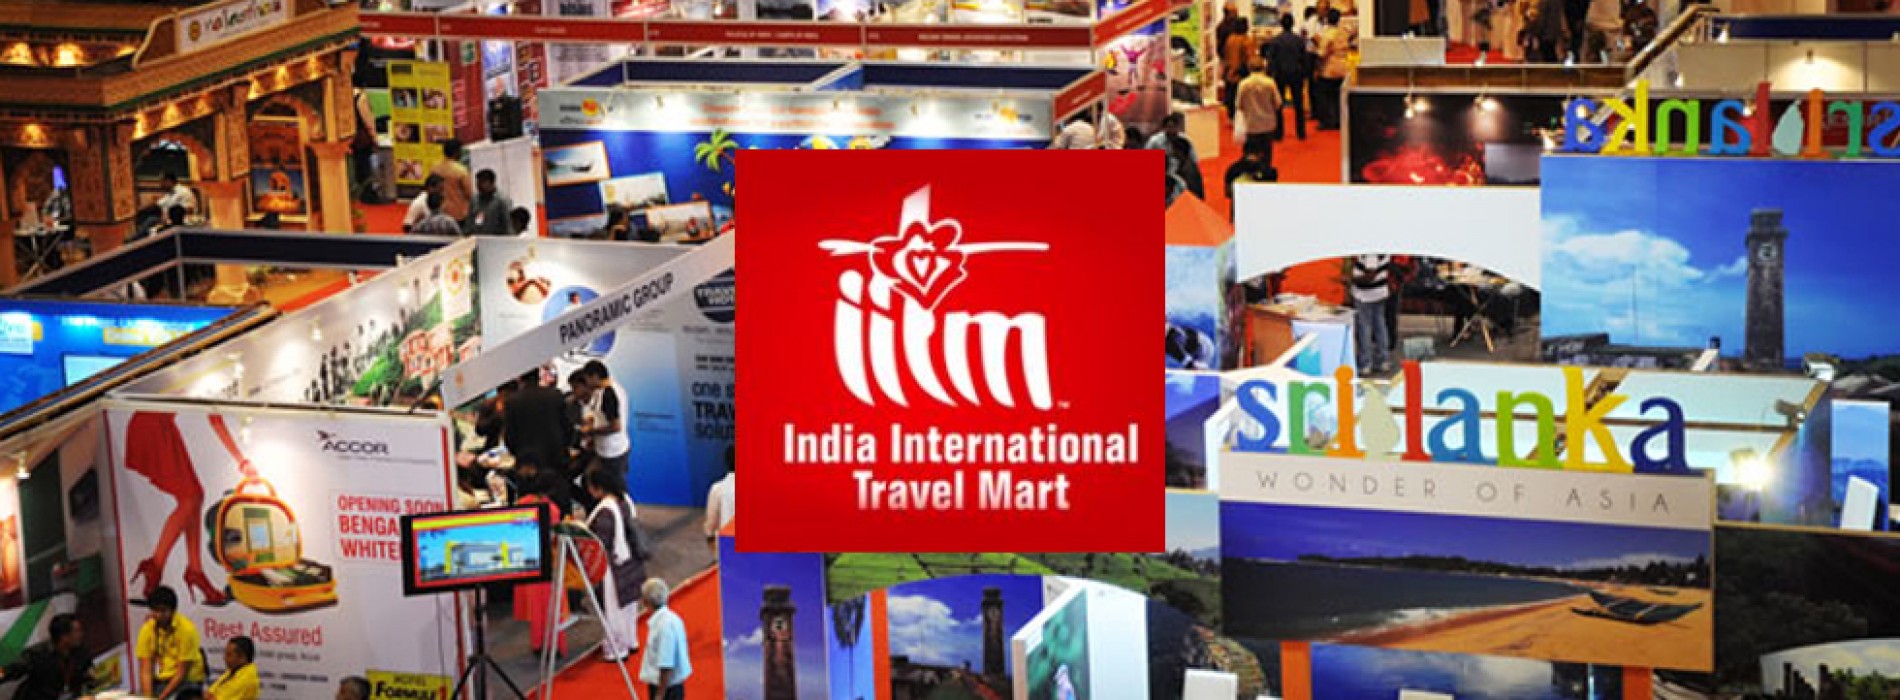 India International Travel Mart events will be conducted in eight major markets of India during